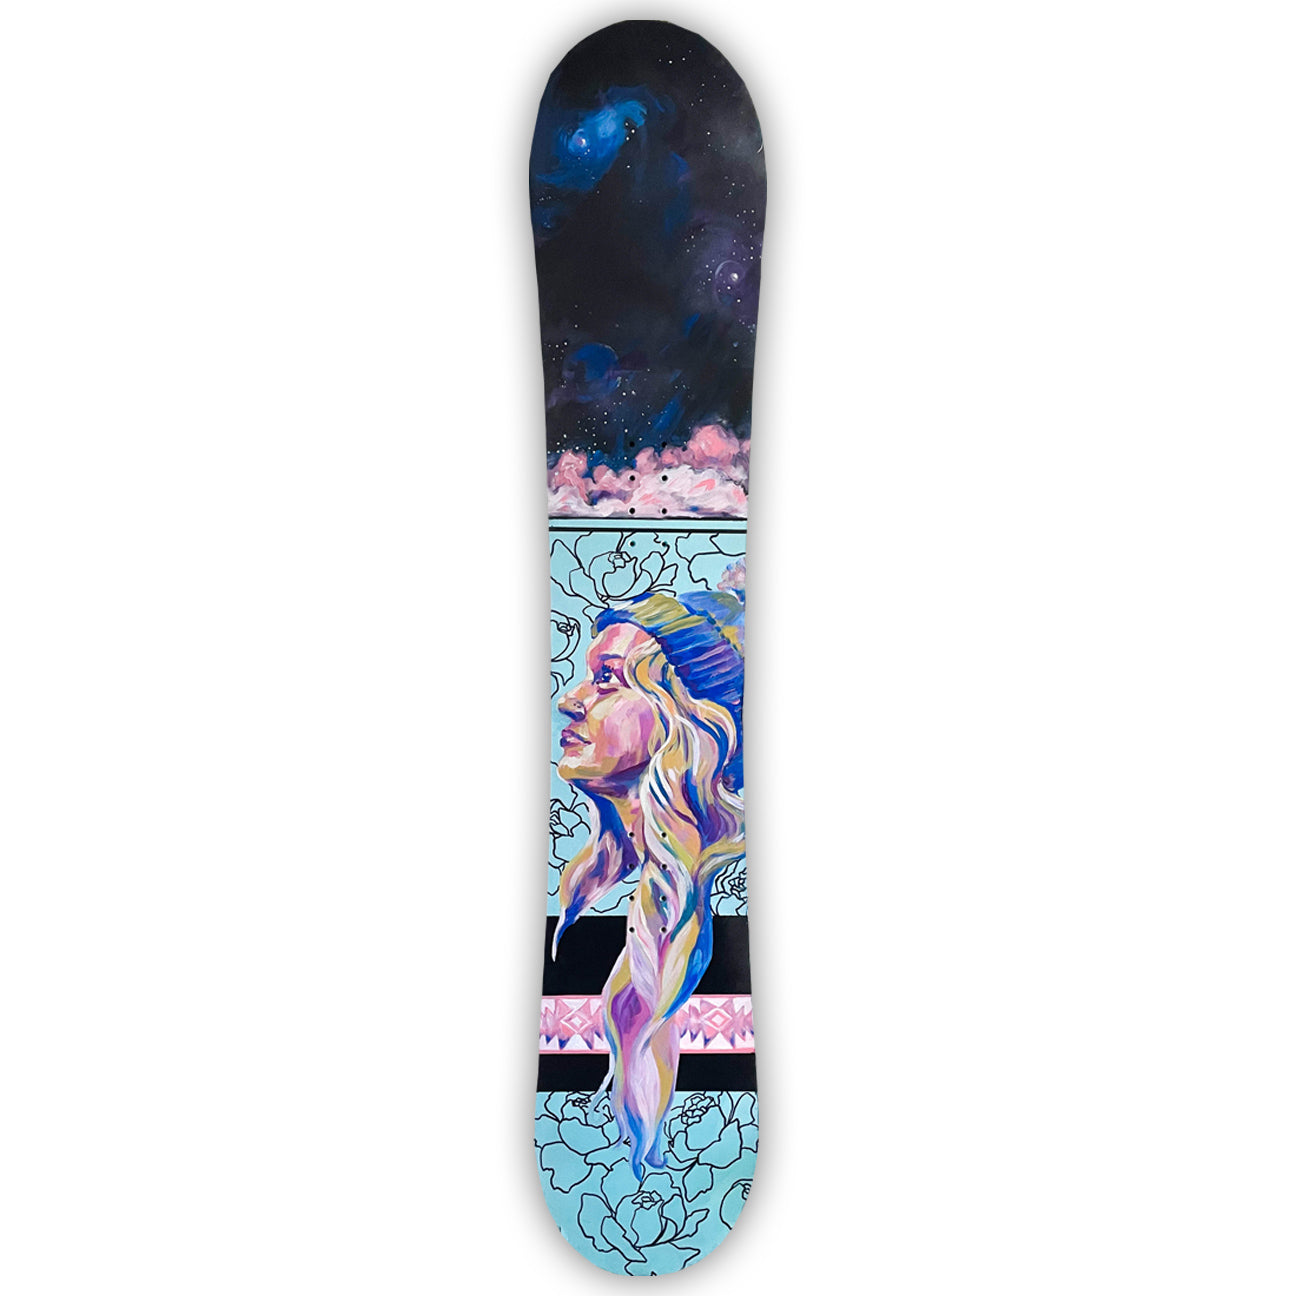 Custom Snowboard, Snowboard Painting, Celestial Flowers, Contemporary Portrait, Ride or die, Mixed Media, Board Customized, Custom Board  